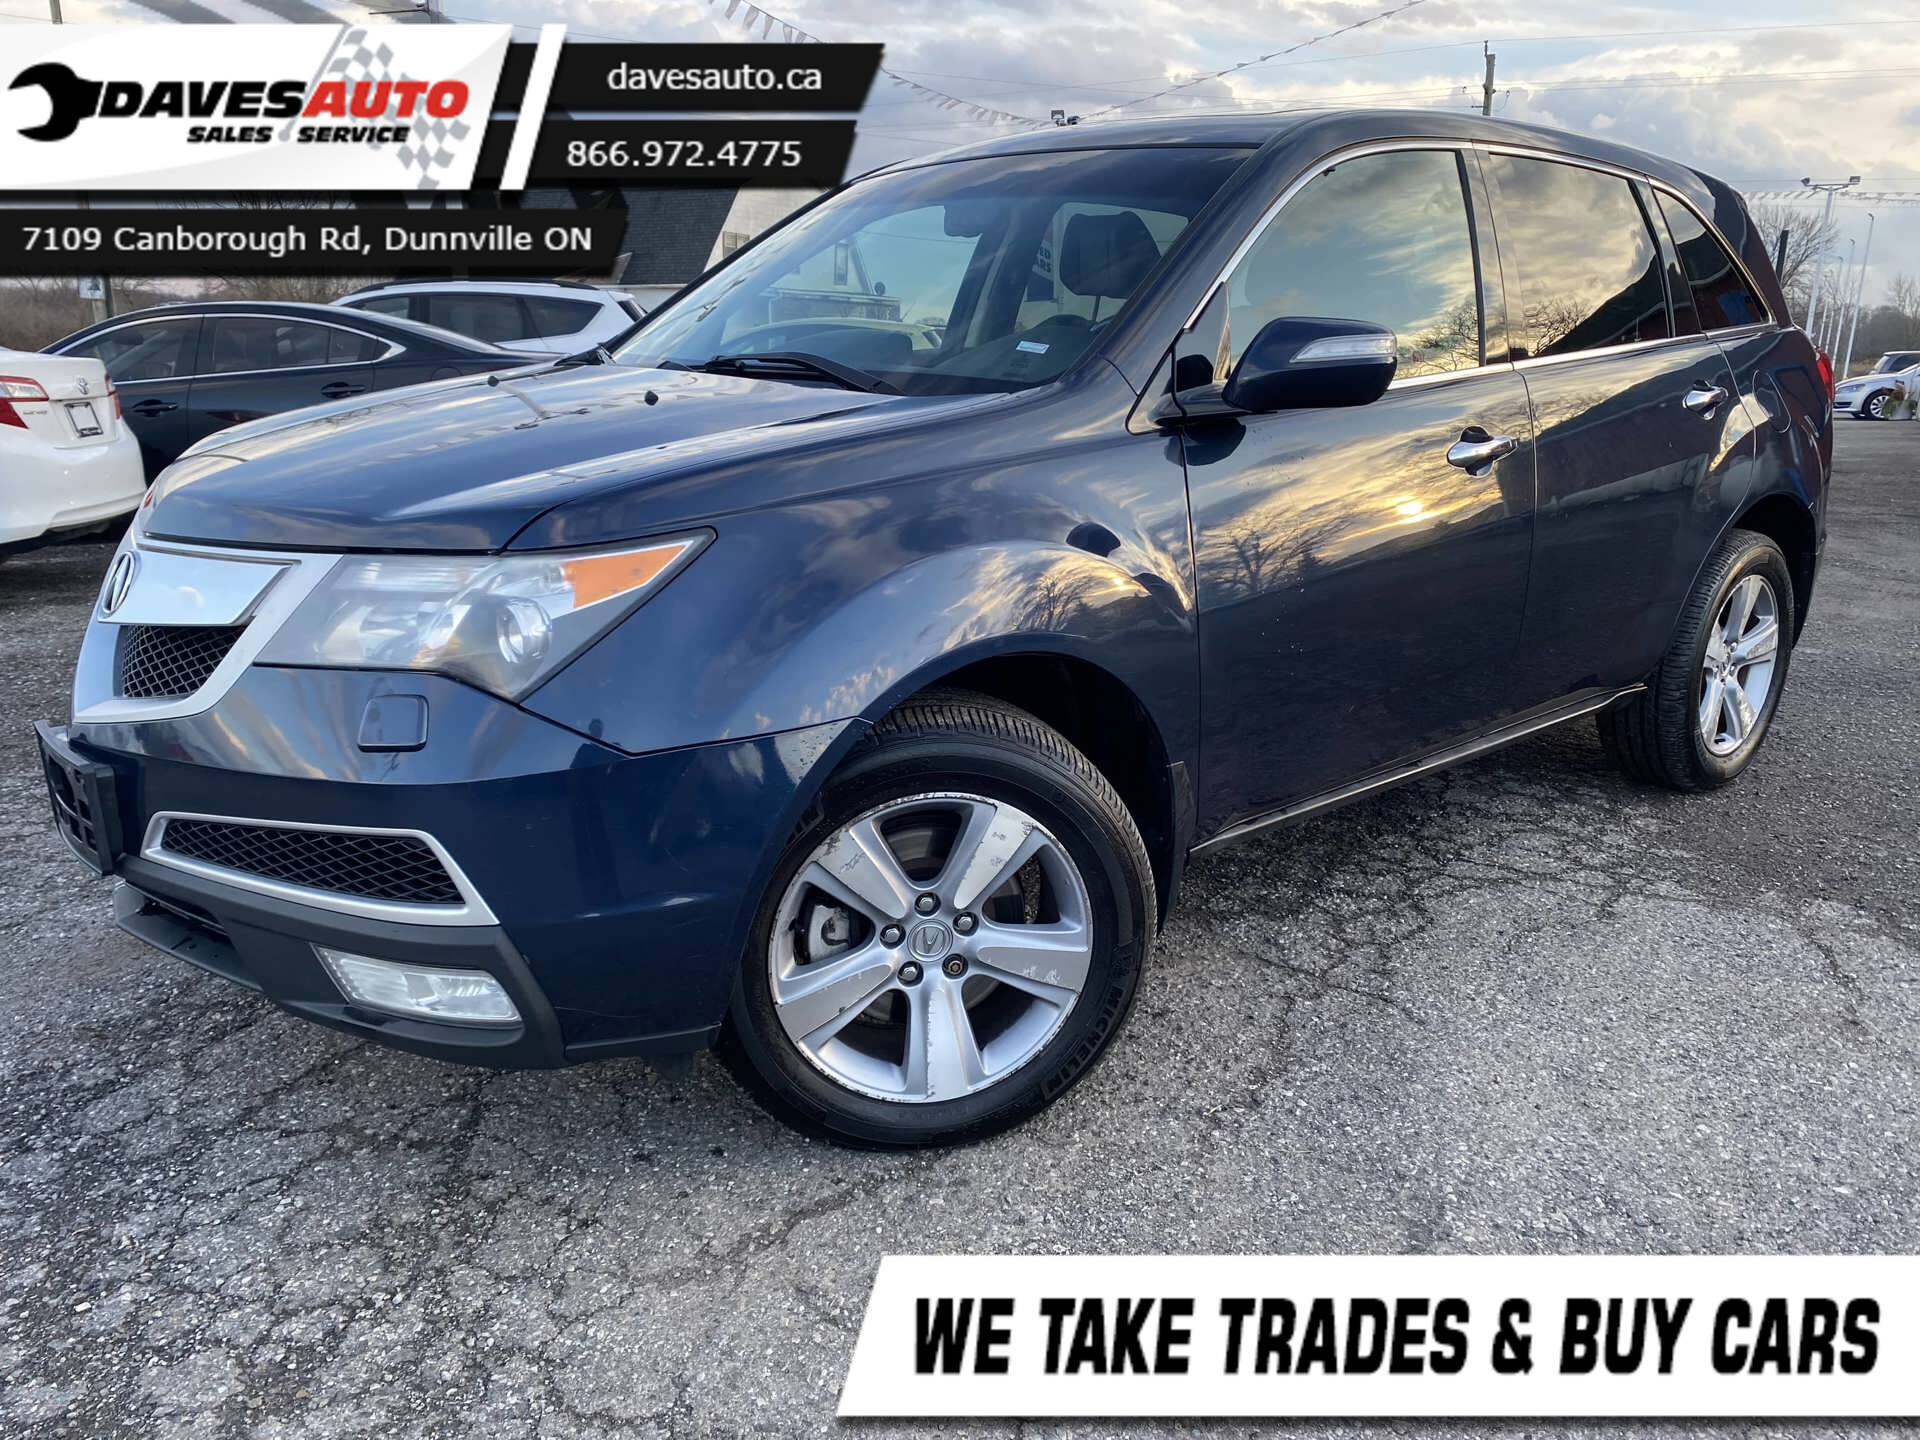 2012 Acura MDX AT w/Tech Package New Timing Belt Etc! Dealer Serv